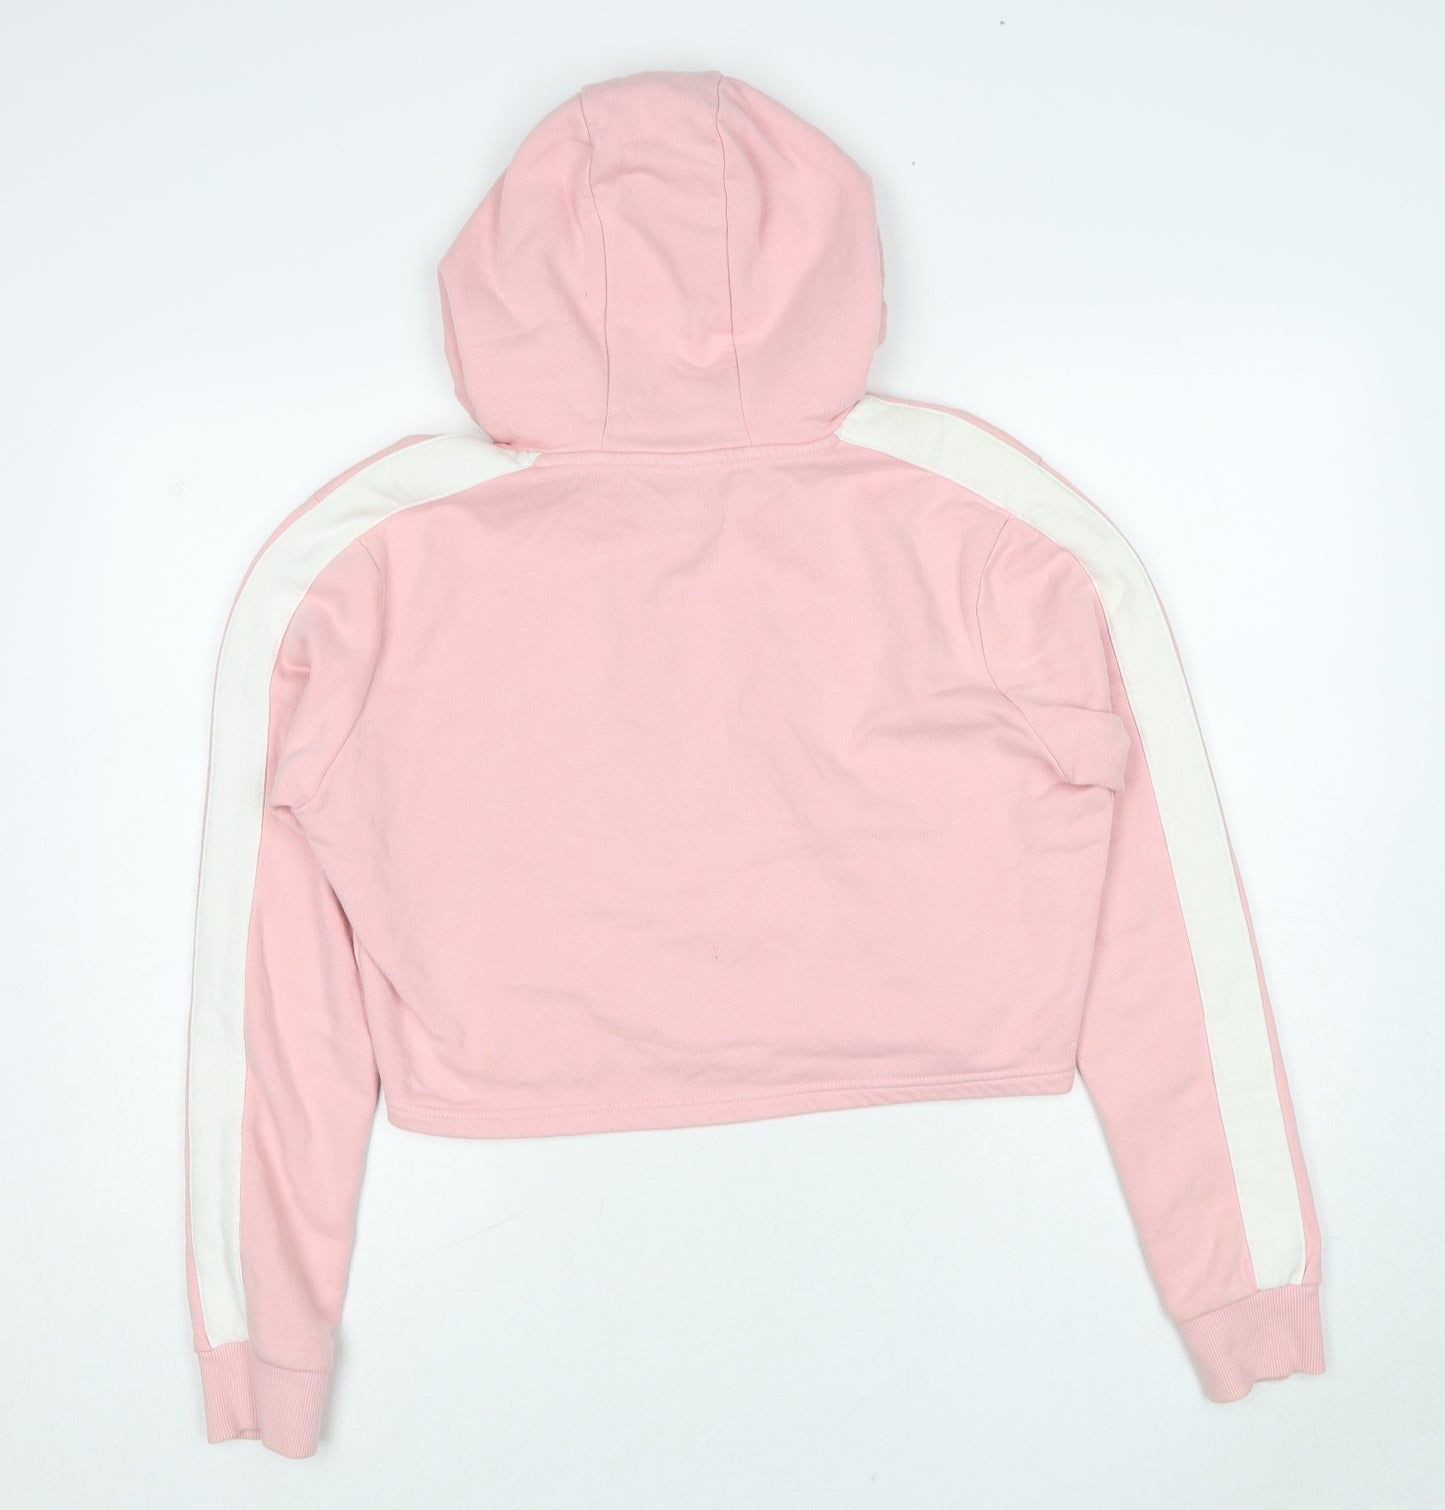 ellesse Womens Pink Cotton Pullover Hoodie Size 12 Pullover